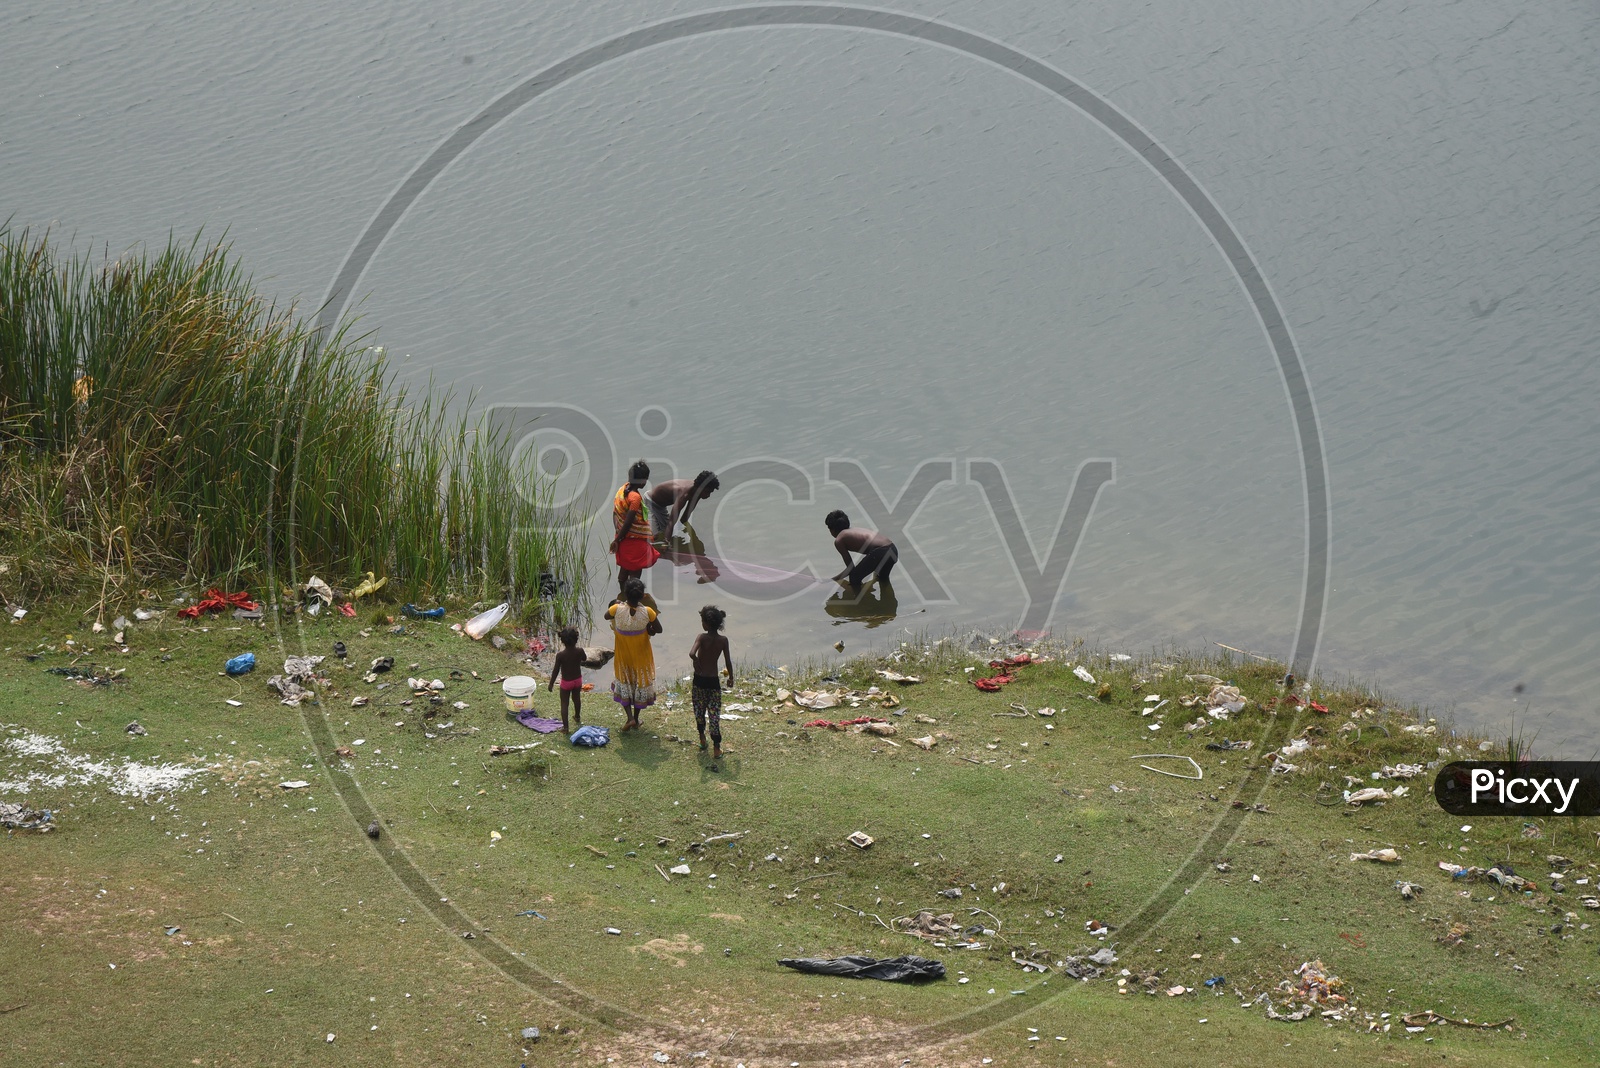 Rural people fishing by the river